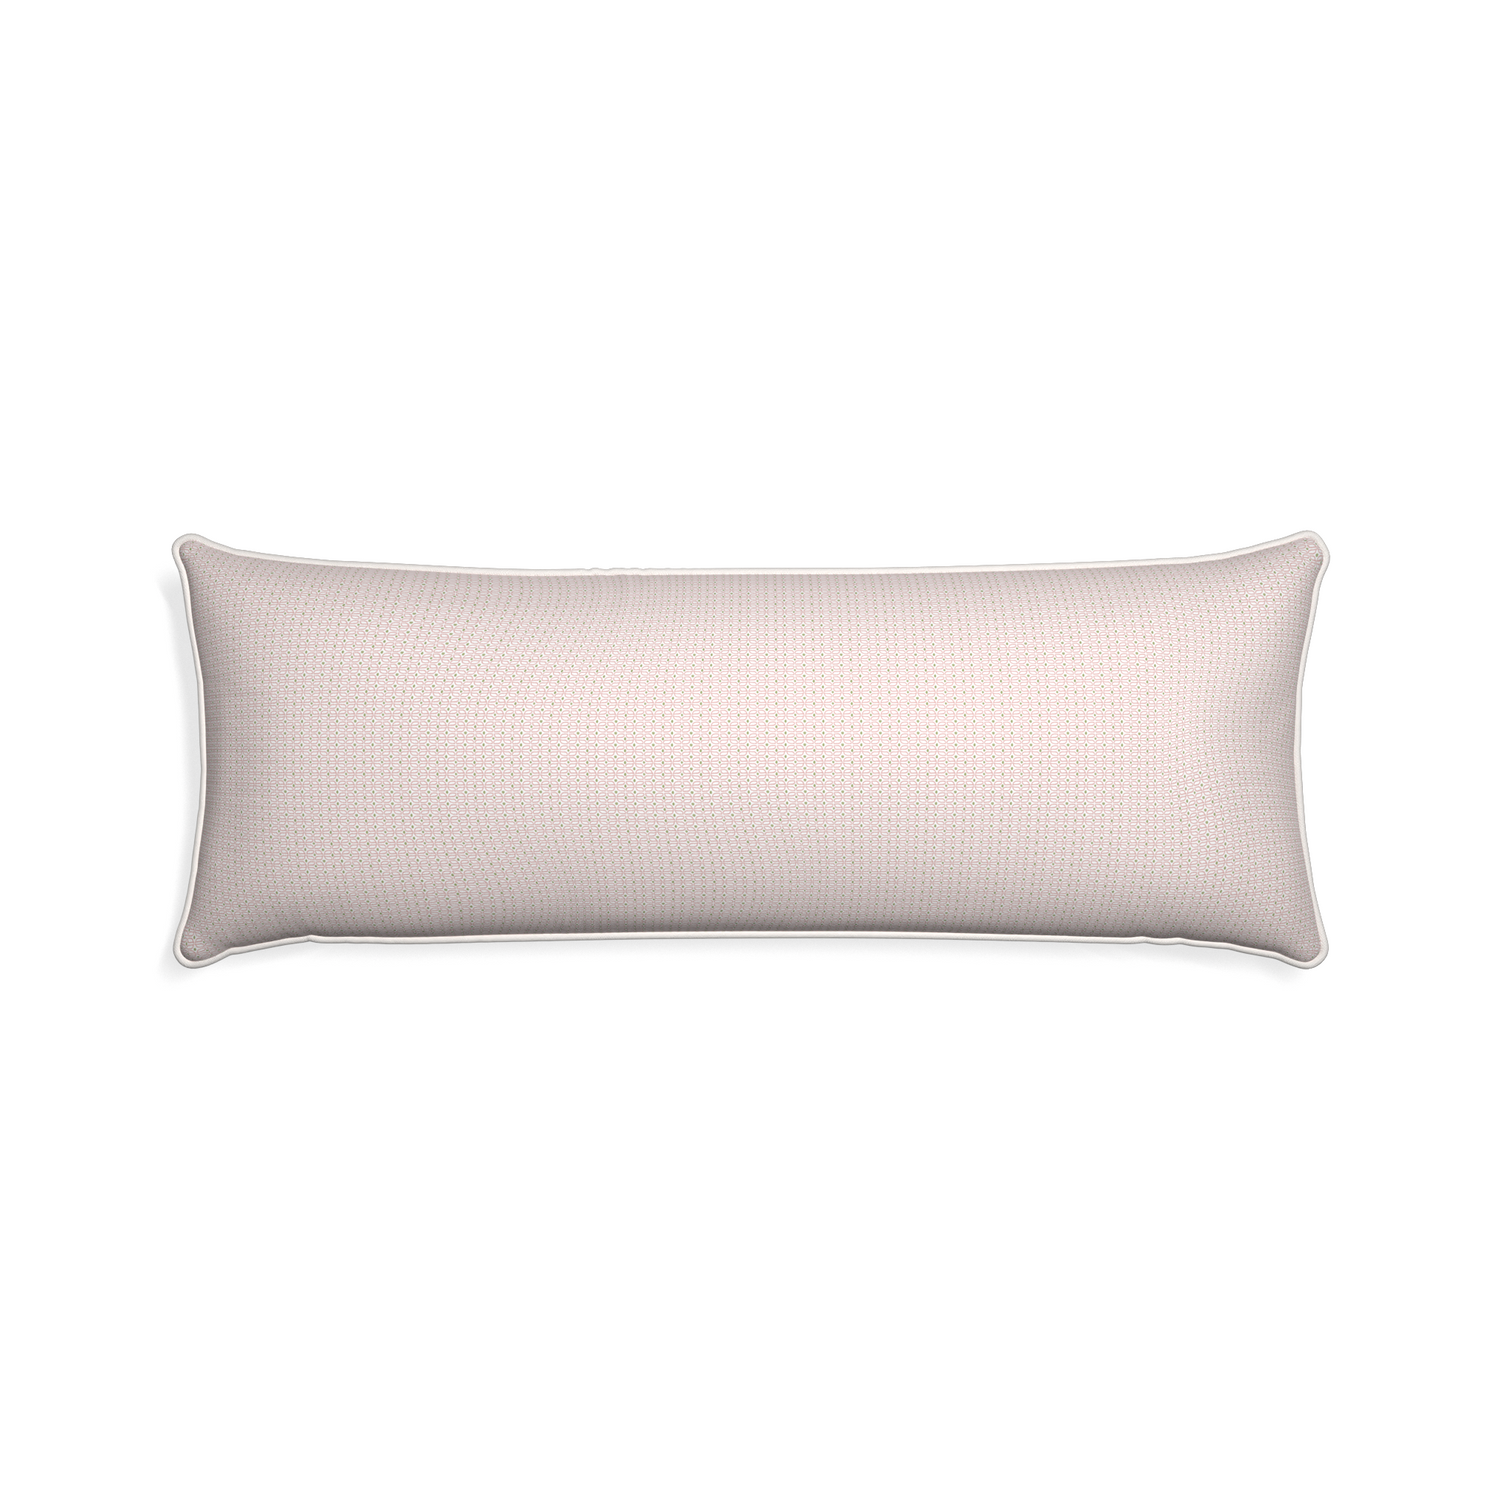 Xl-lumbar loomi pink custom pink geometricpillow with snow piping on white background